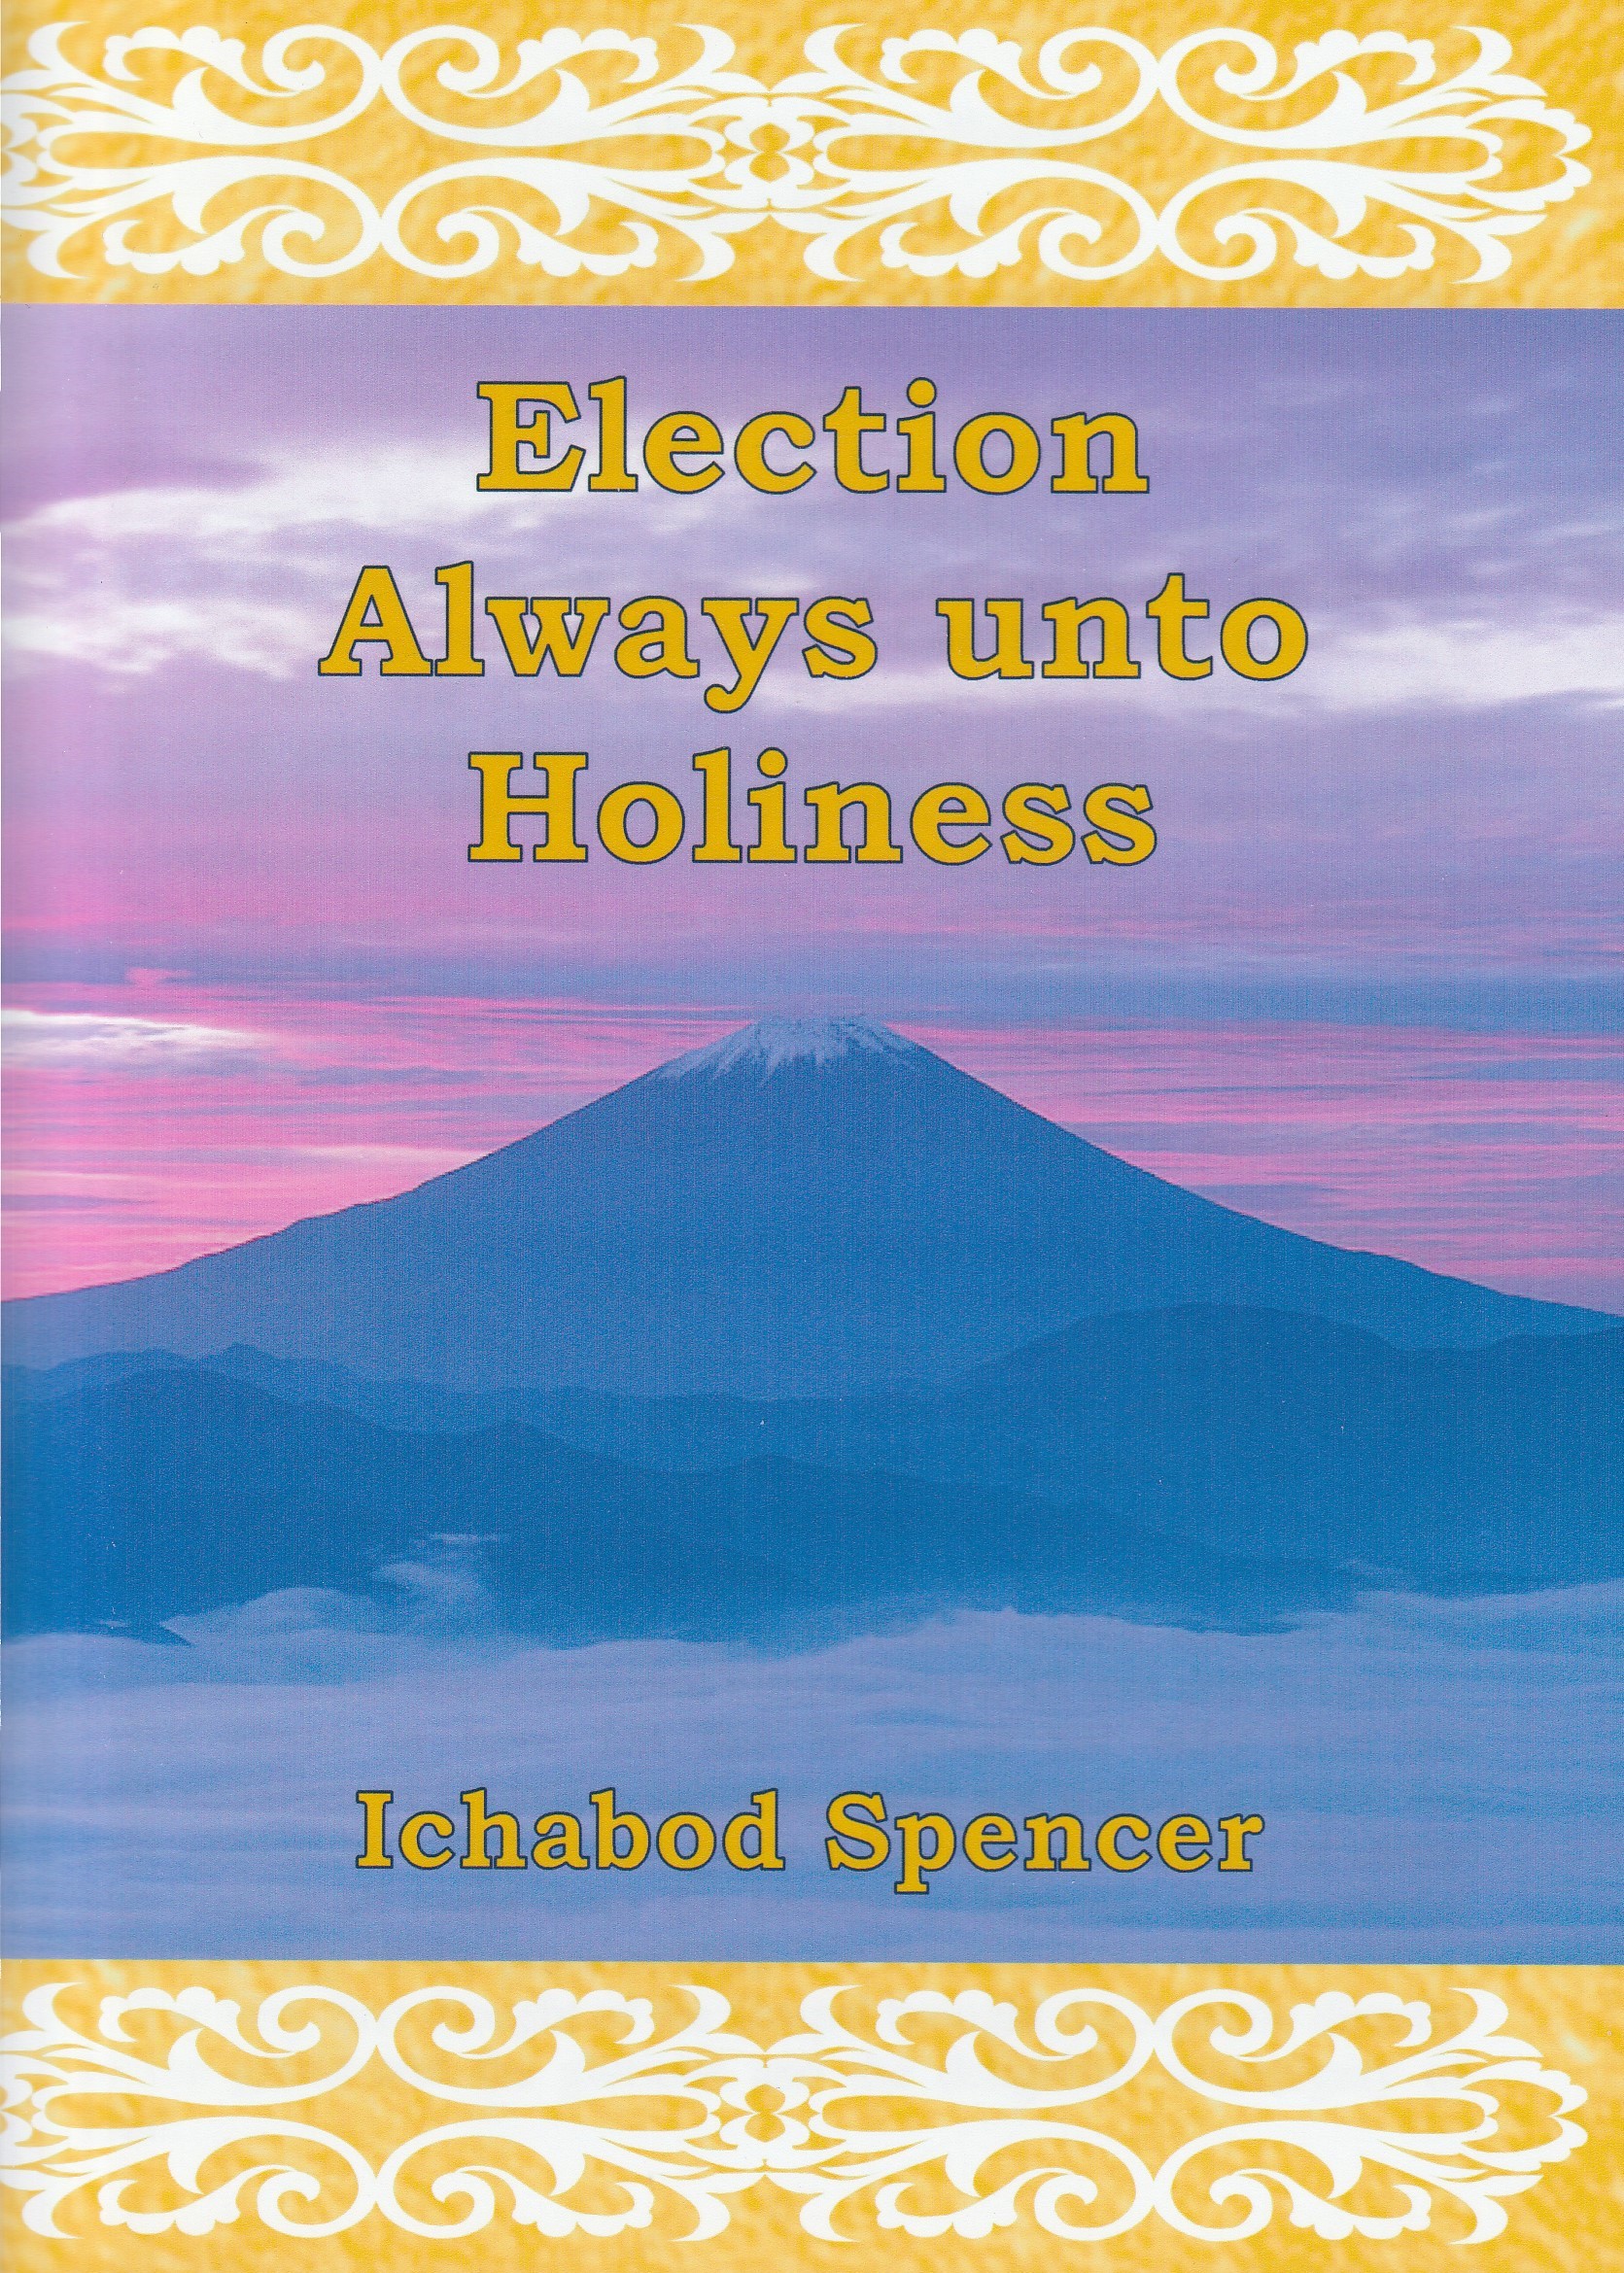 Election Always unto Holiness